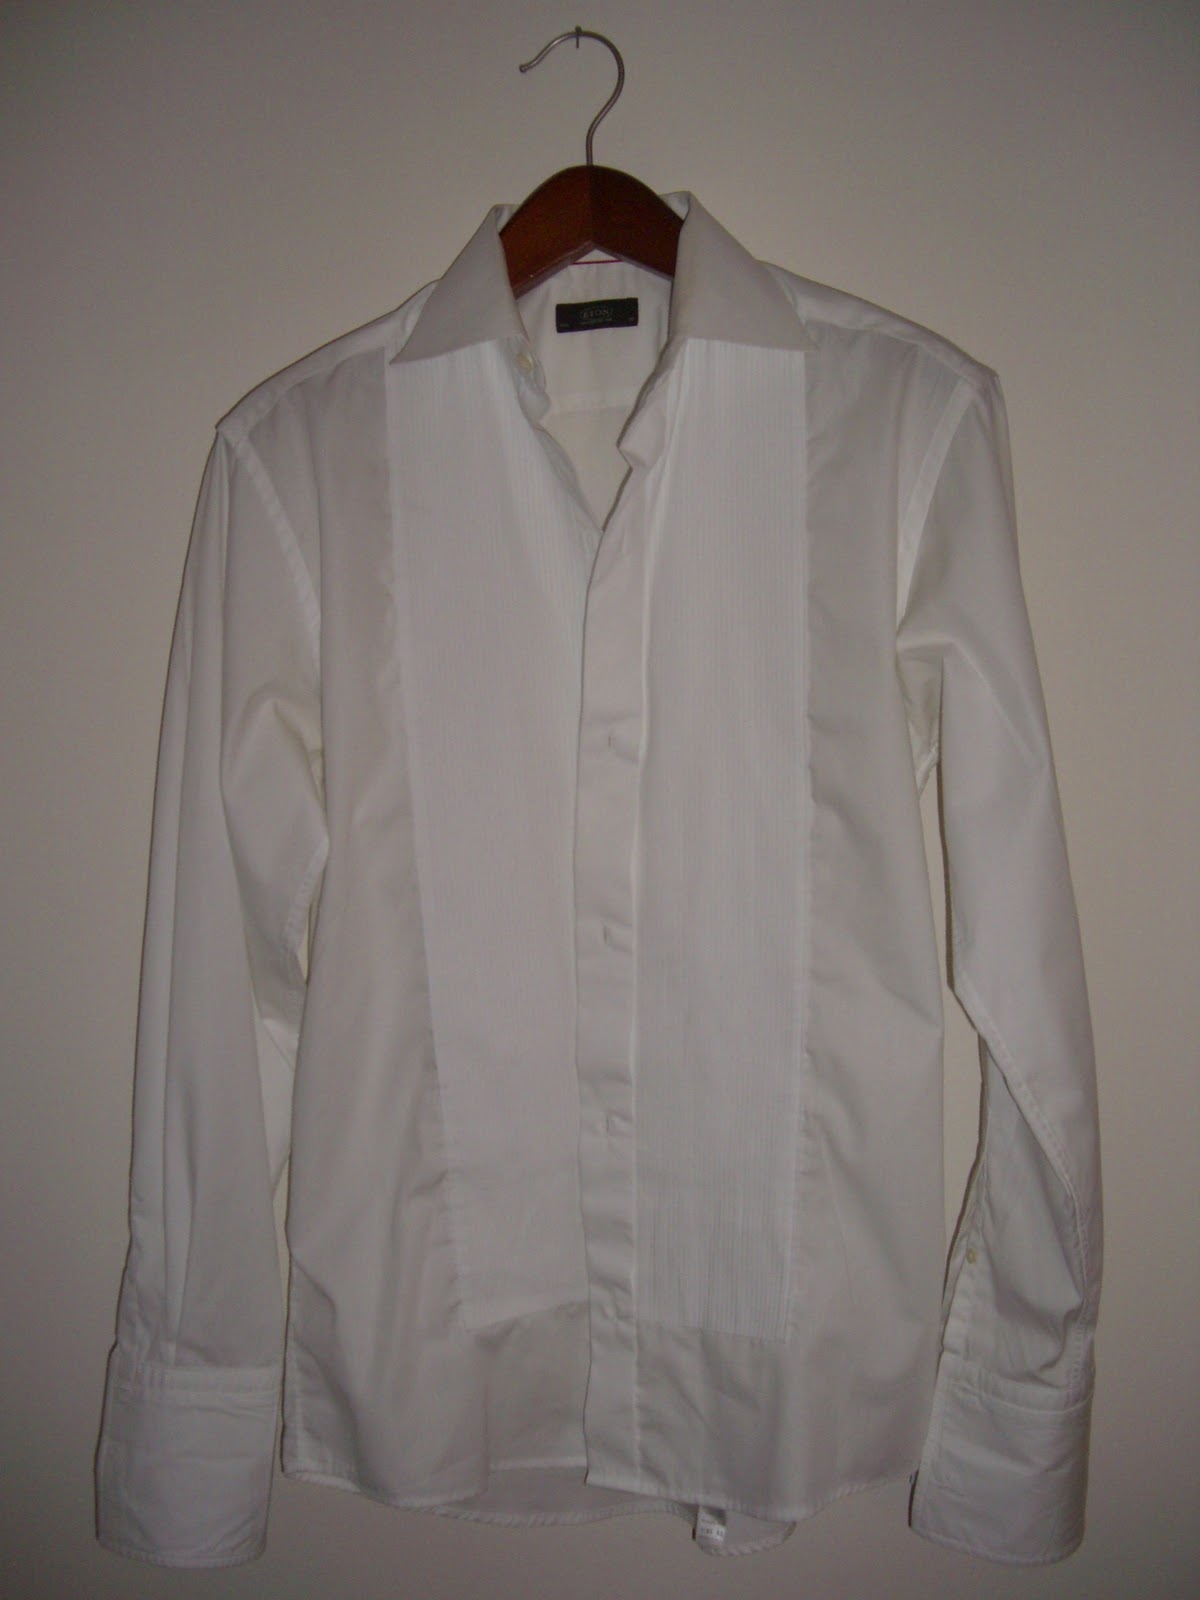 justtestingthis33: Eton White Formal Shirt (Pleated Front)